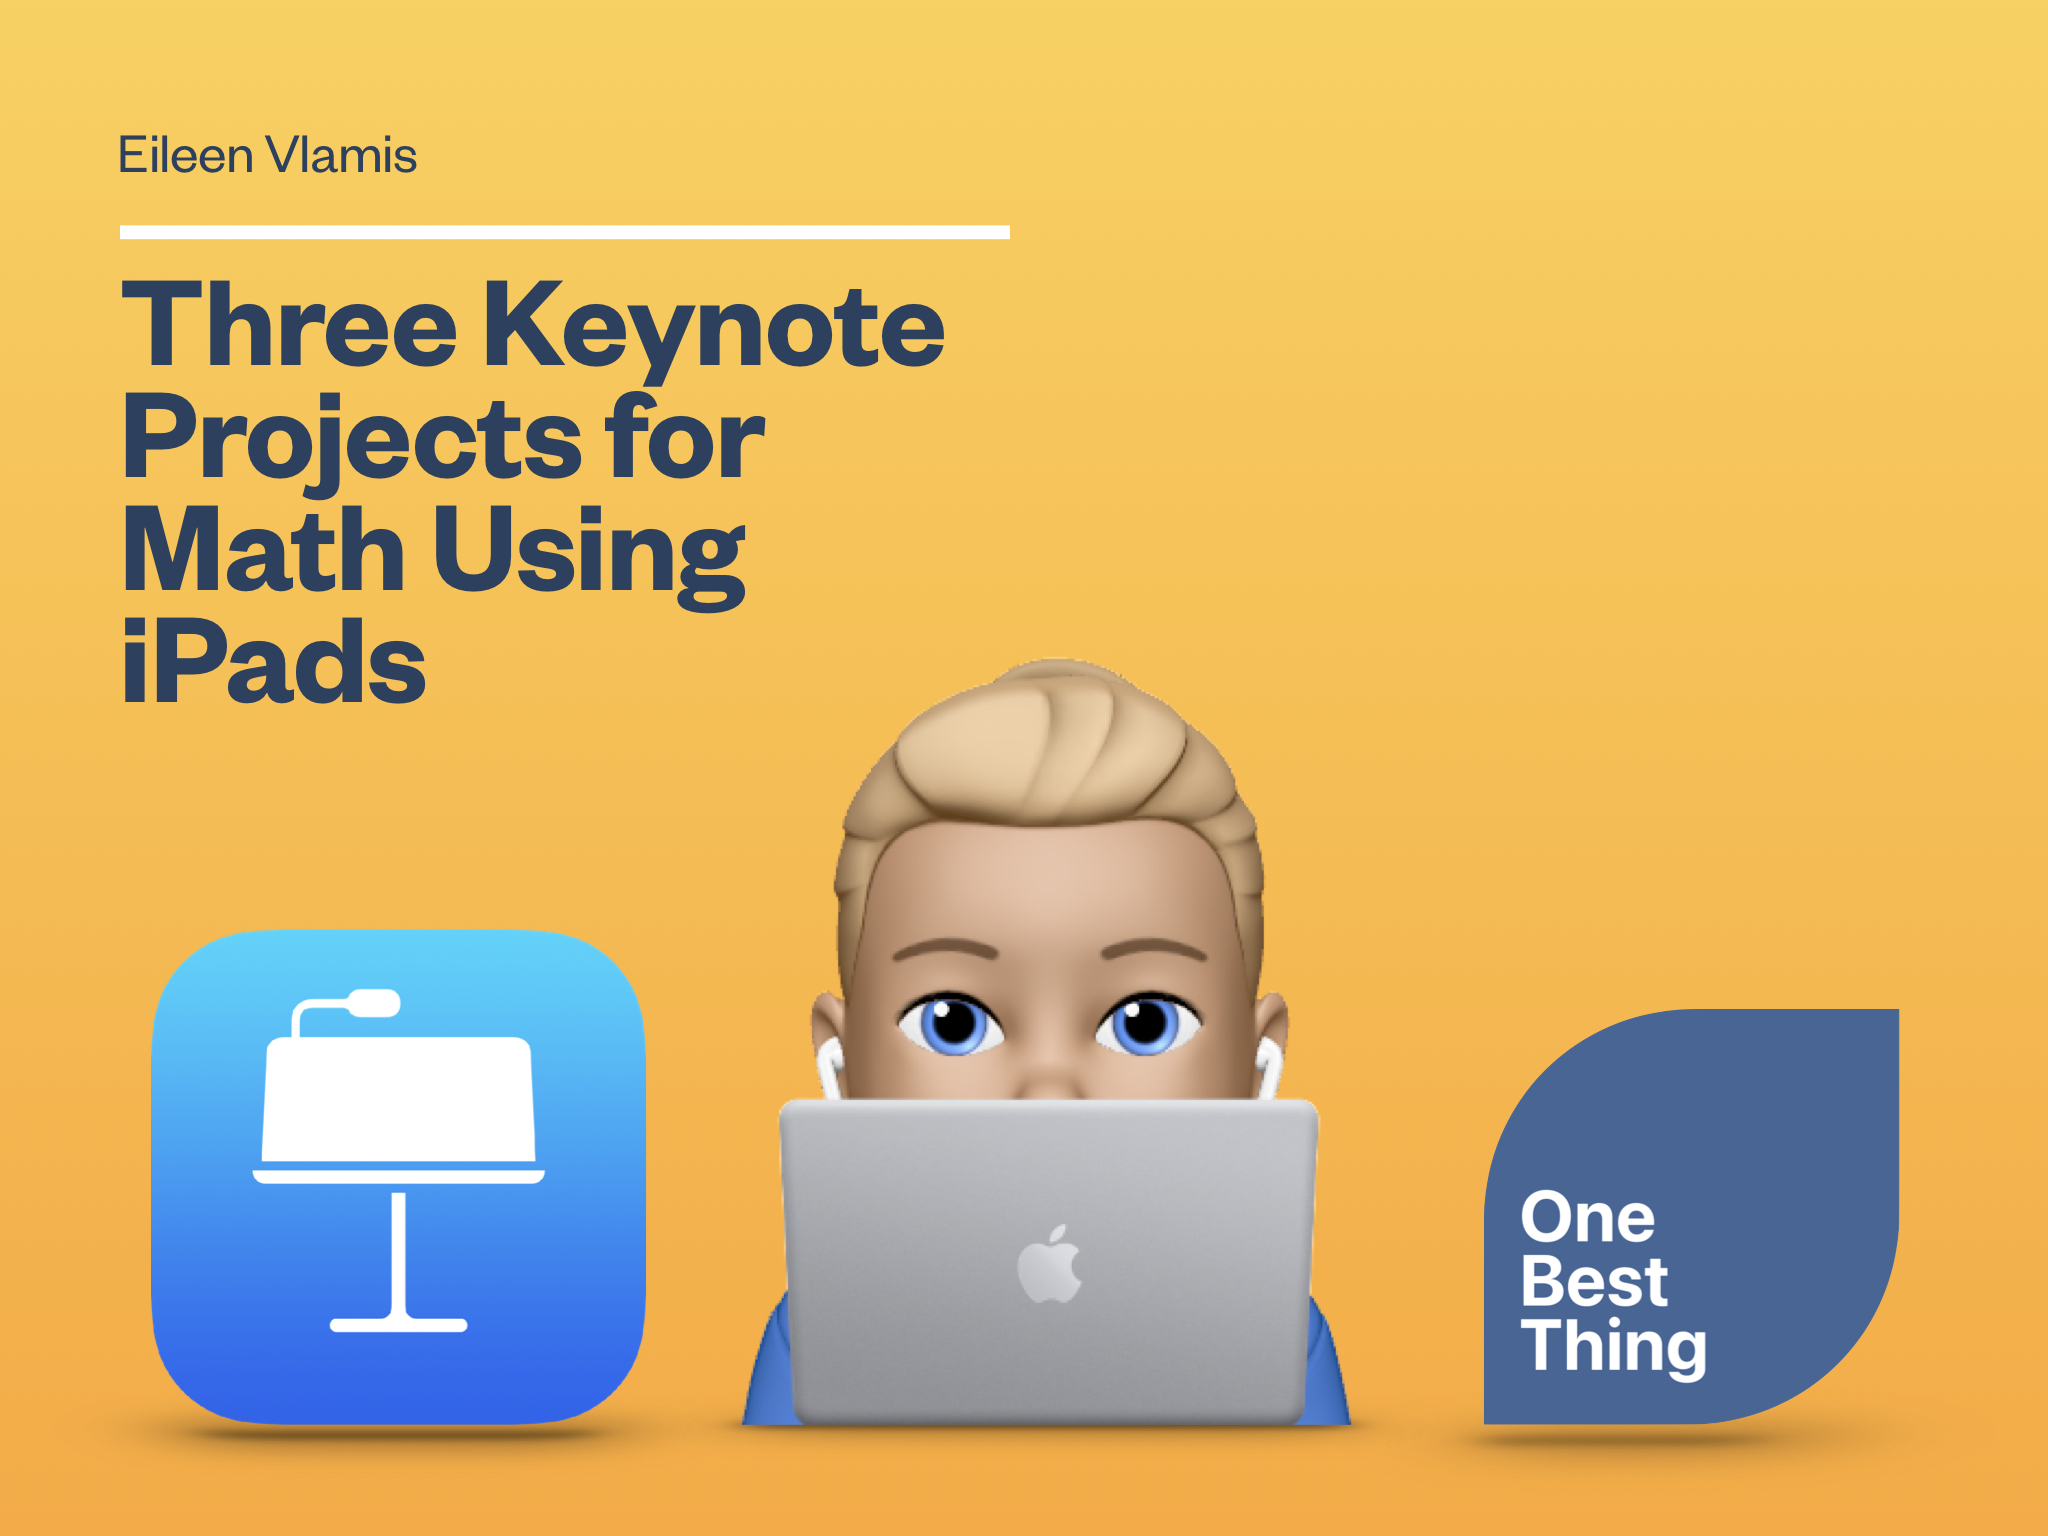 Three Keynote Projects for Math Using iPads